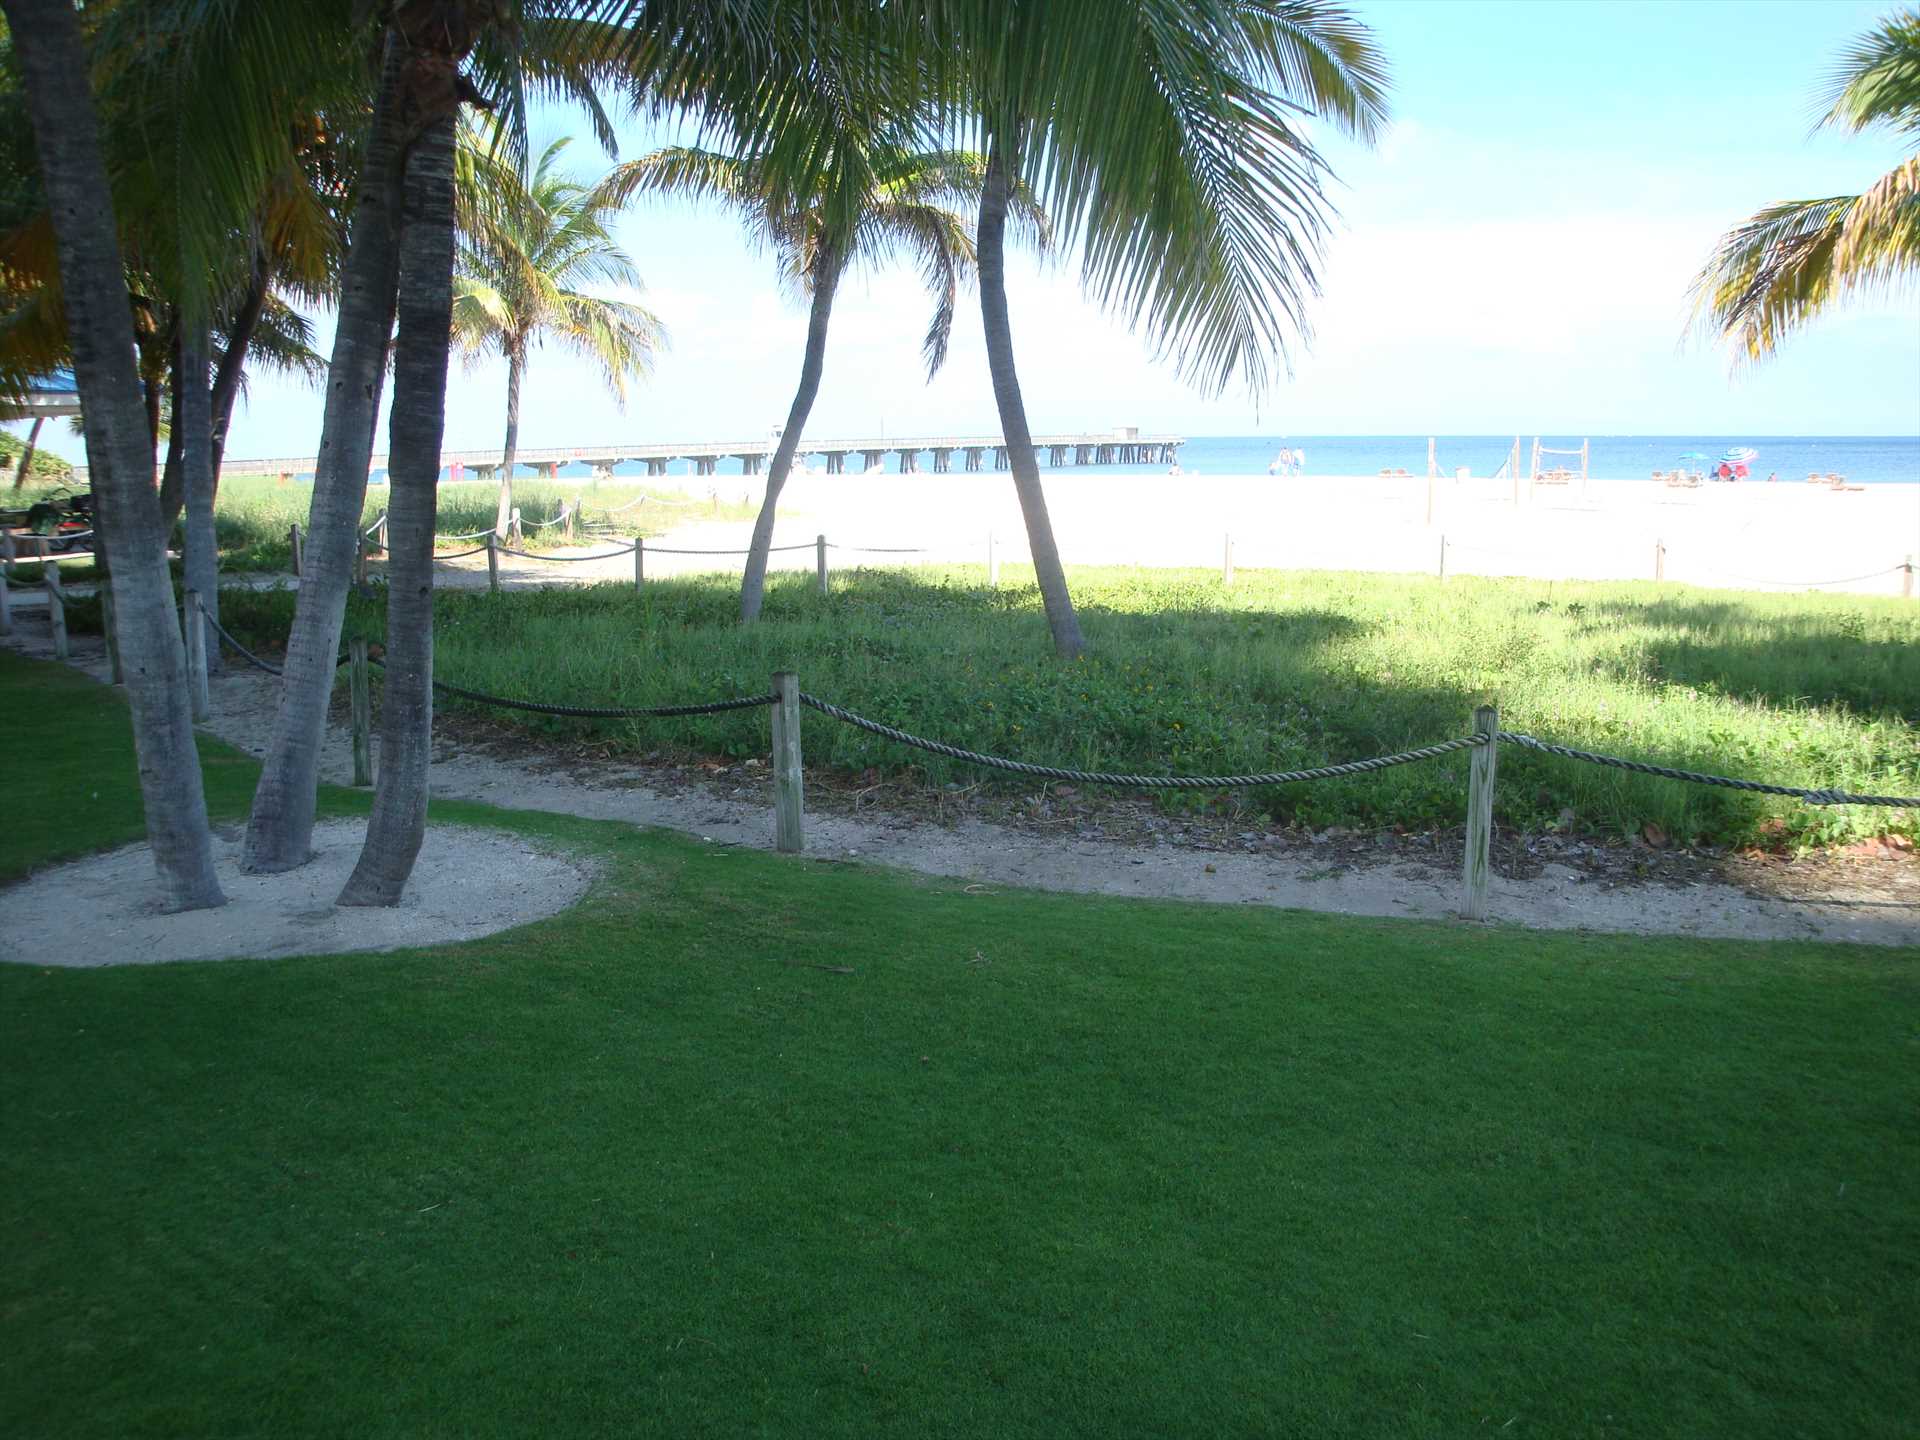 Beach entrances are maintained like putting greens.